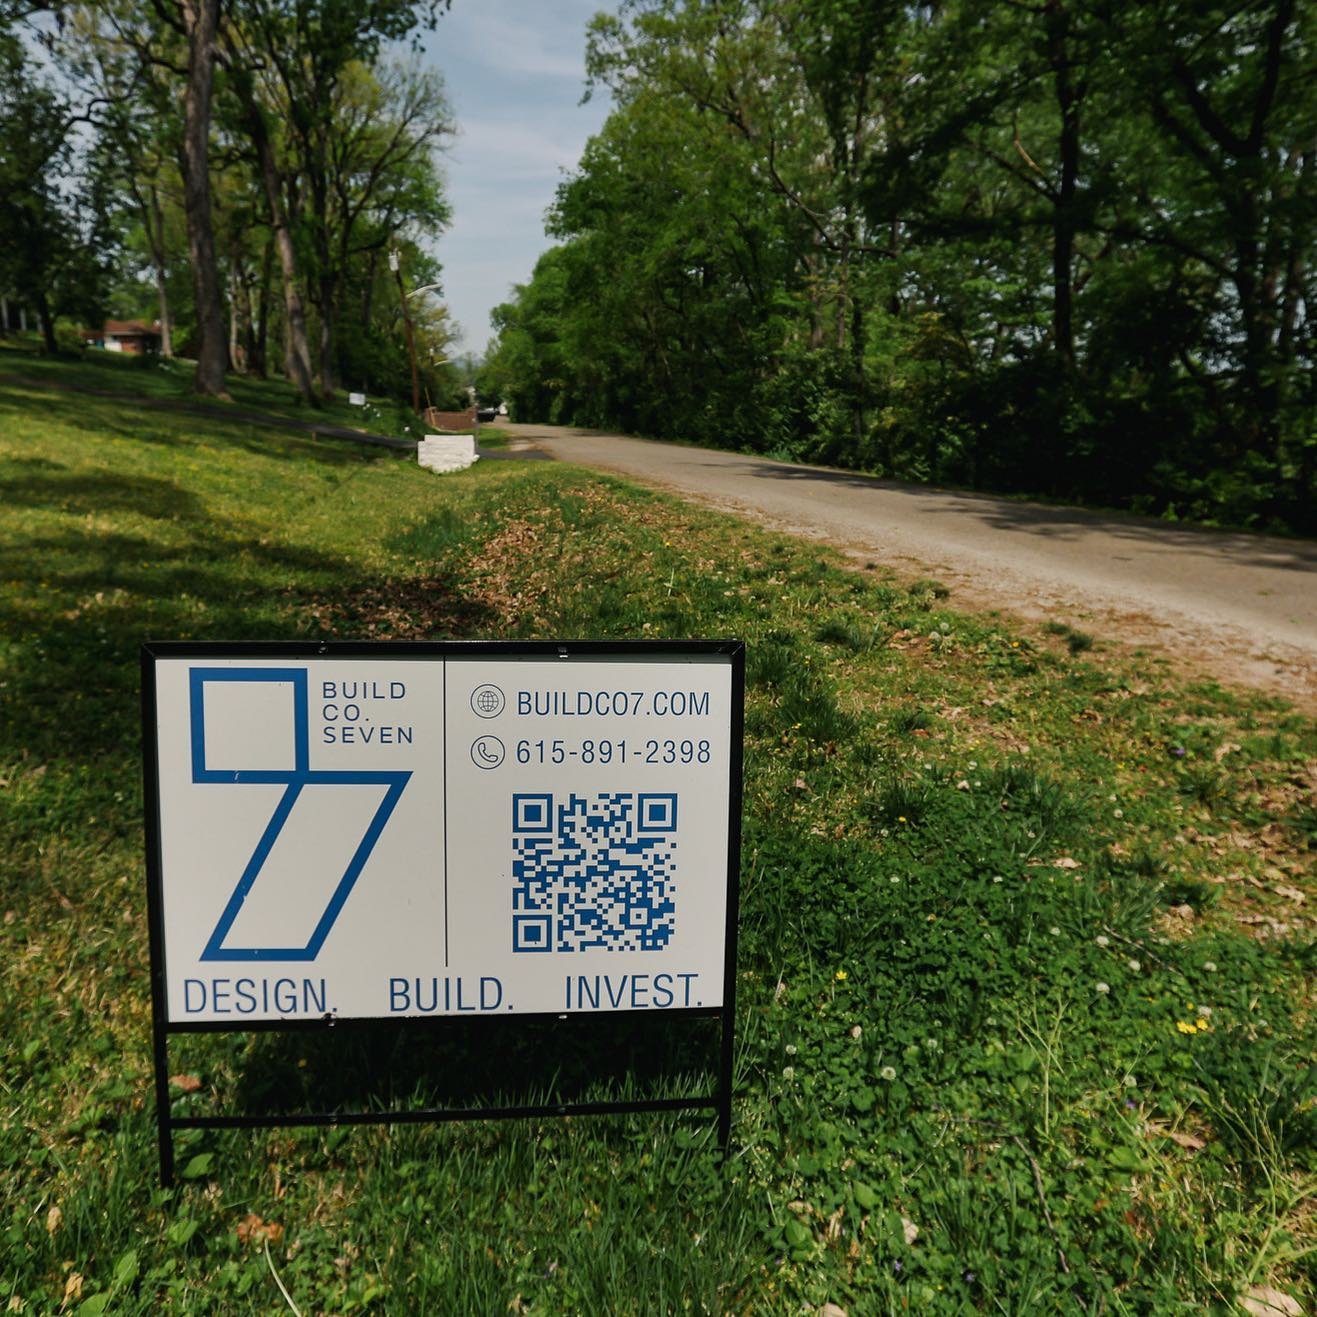 Driving through Nashville, seeing our signs paired with happy clients&mdash;it&rsquo;s what we live for. Building a more beautiful Nashville, one project at a time! 
📲 615.891.2398
💻 Buildco7.com